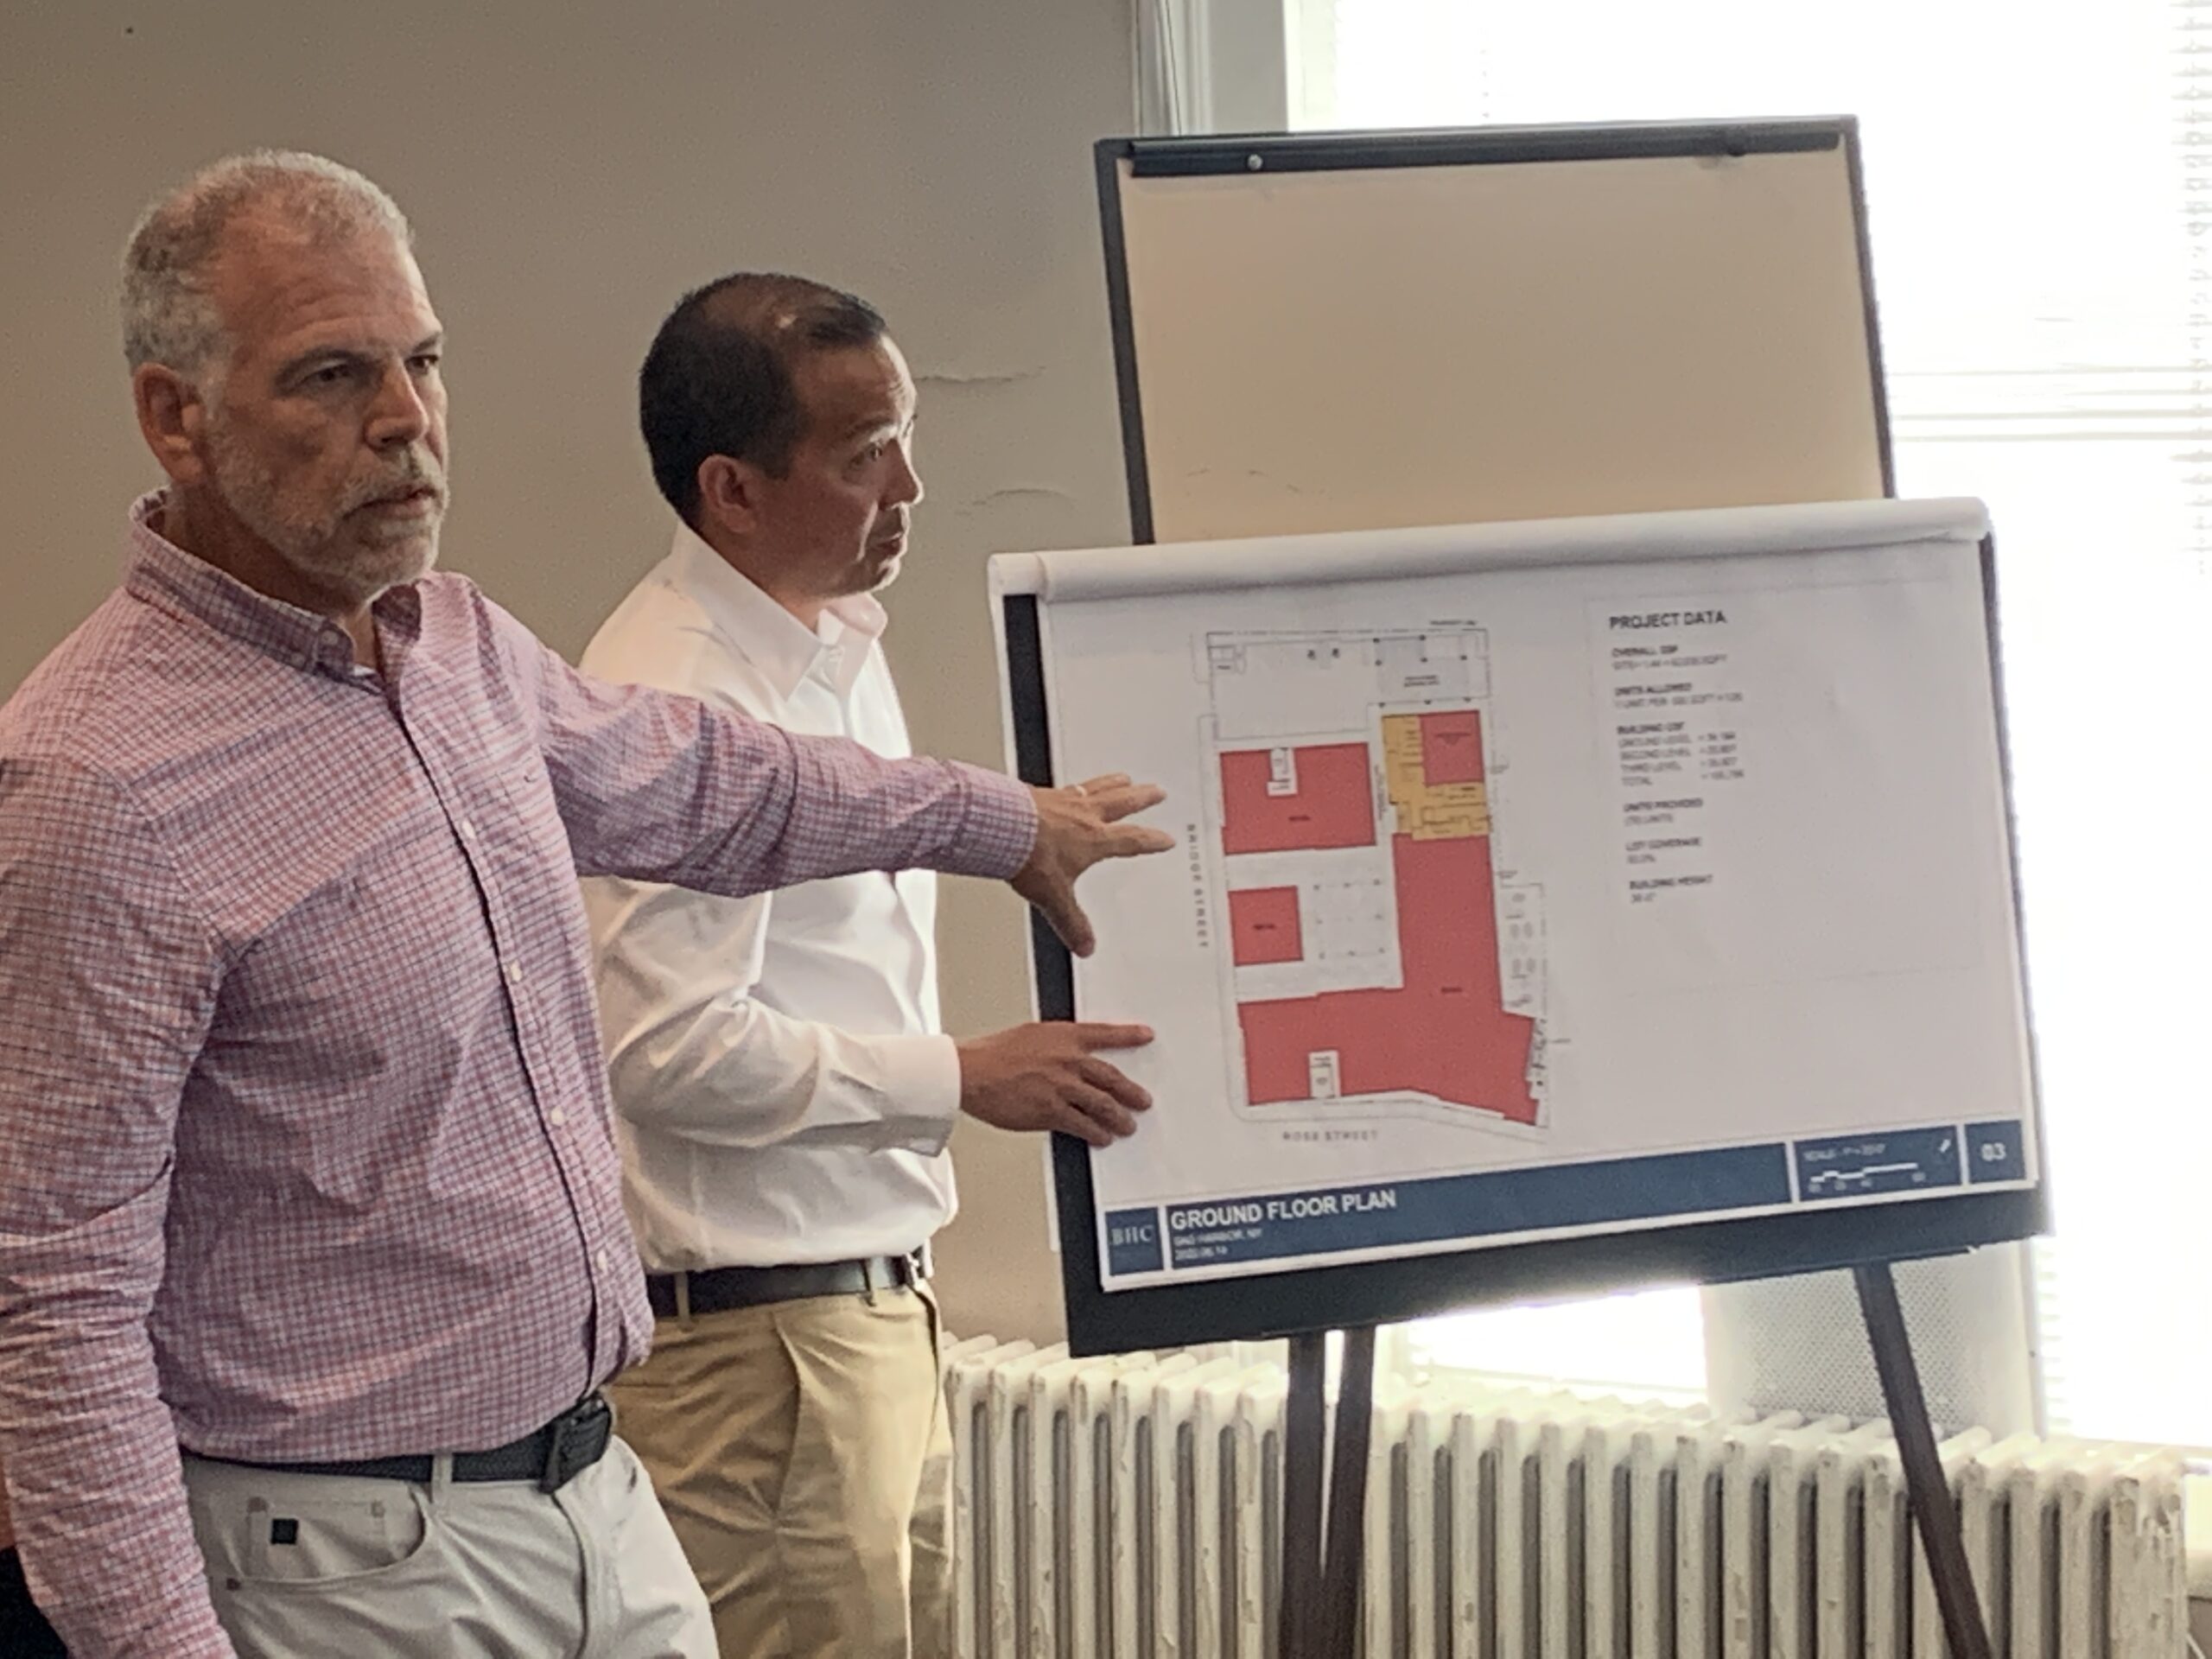 Salvatore Coco, left, of BHC Architects, and Roger Pine of Conifer Realty, show plans for the affordable housing development proposed by Adam Potter for property off Rose and Bridge streets to members of the Sag Harbor Village Board on Friday. STEPHEN J. KOTZ